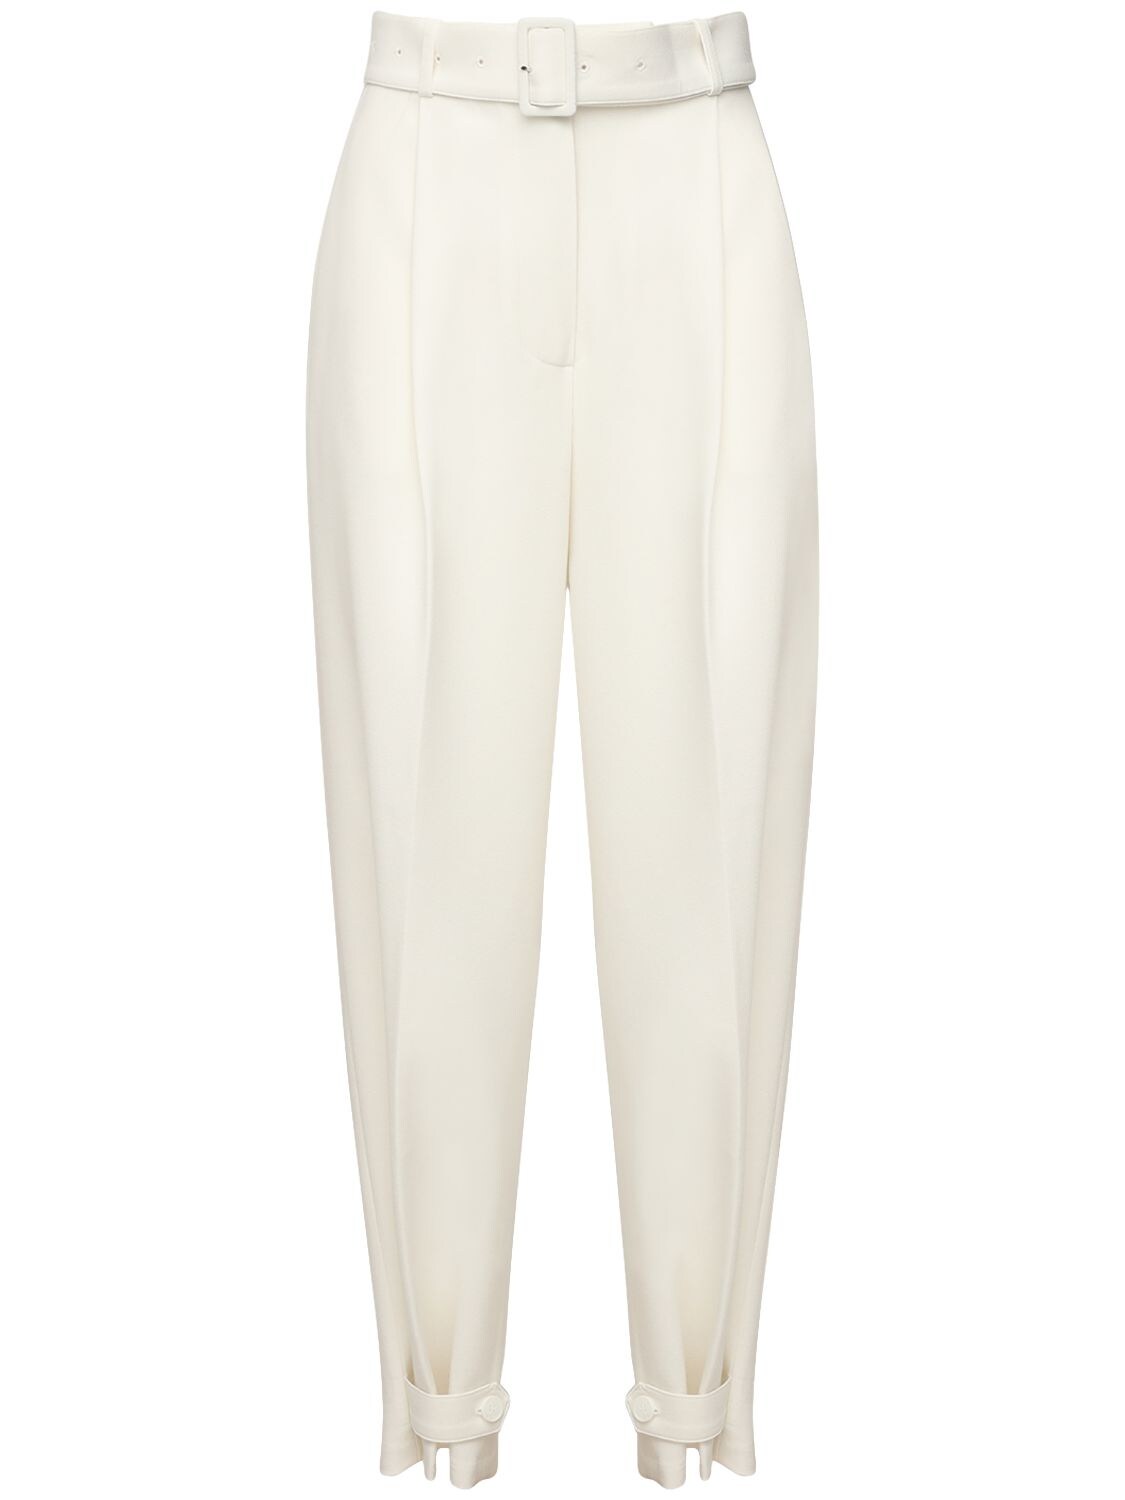 The Frankie Shop Elvira Crepe Straight Pants In White